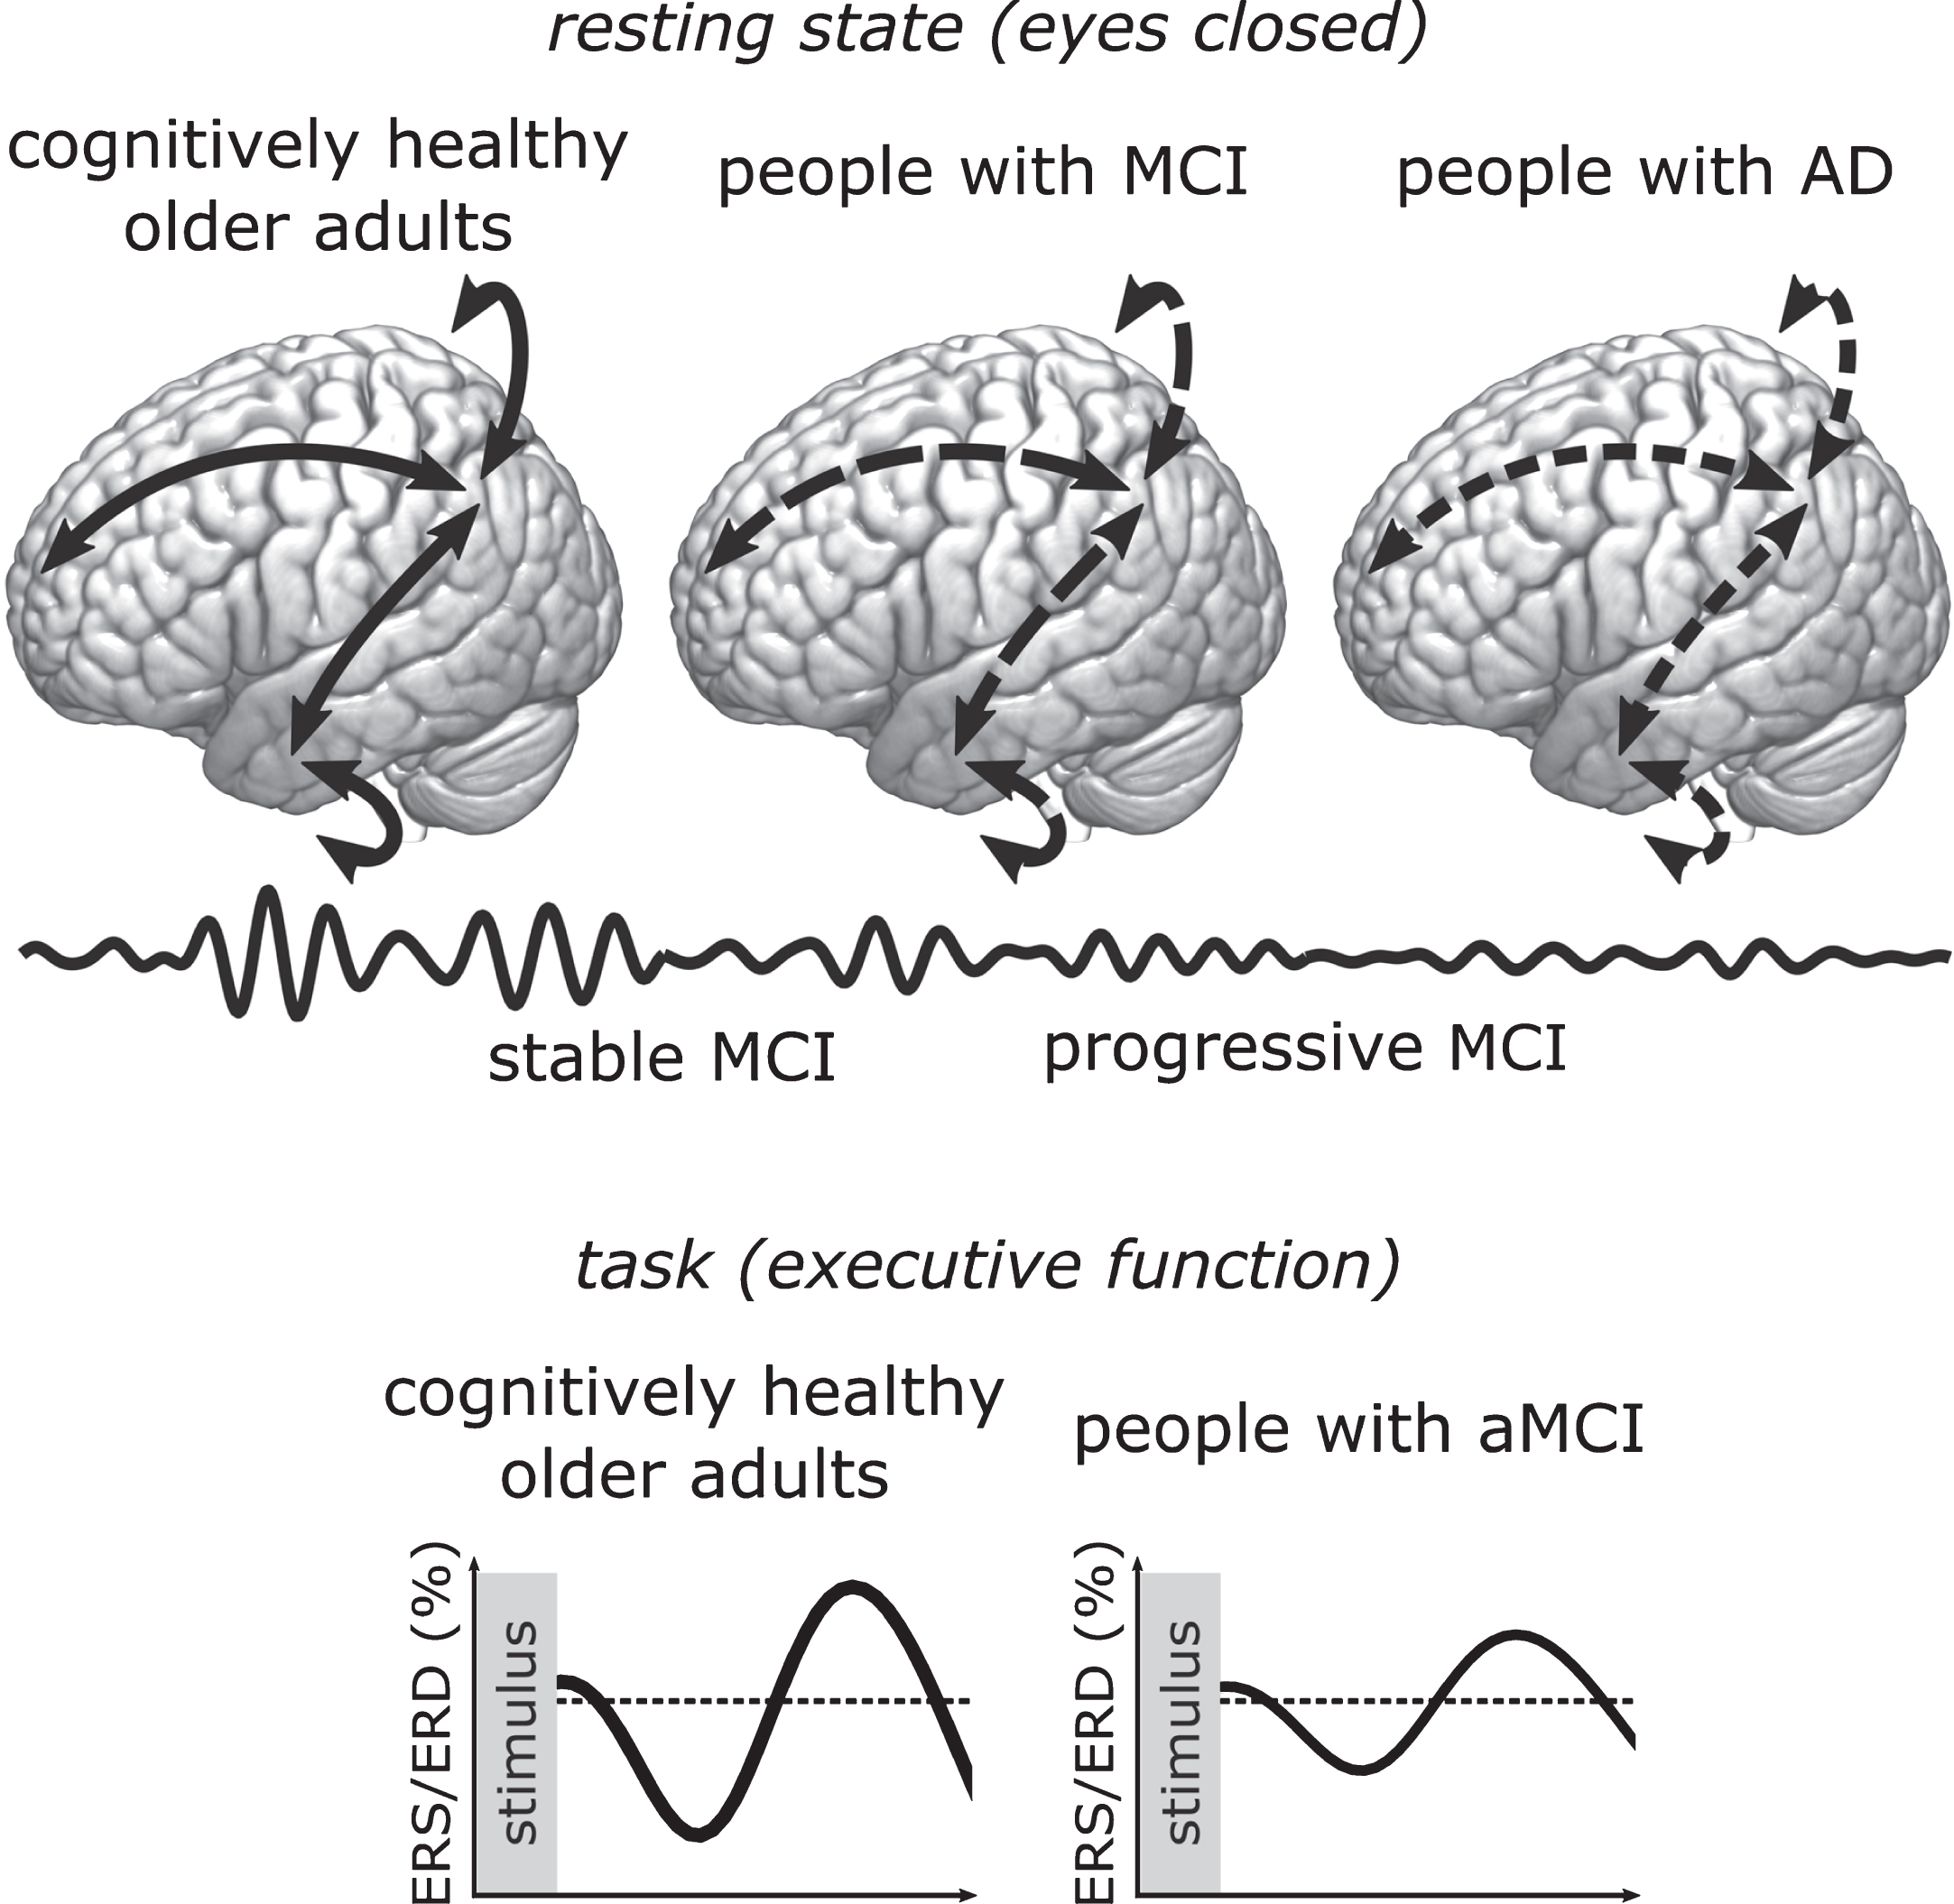 Schematic summary of most consistent findings showing lower power of alpha oscillations and connectivity of parietal areas during rest in people who are further along the continuum of cognitive decline (top panel), and lower reactivity to task stimuli in people with aMCI compared to cognitively healthy older adults (bottom panel). Arrows represent functional connectivity, and the amplitude of waves the power of alpha oscillations. Dashed arrows represent lower functional connectivity.